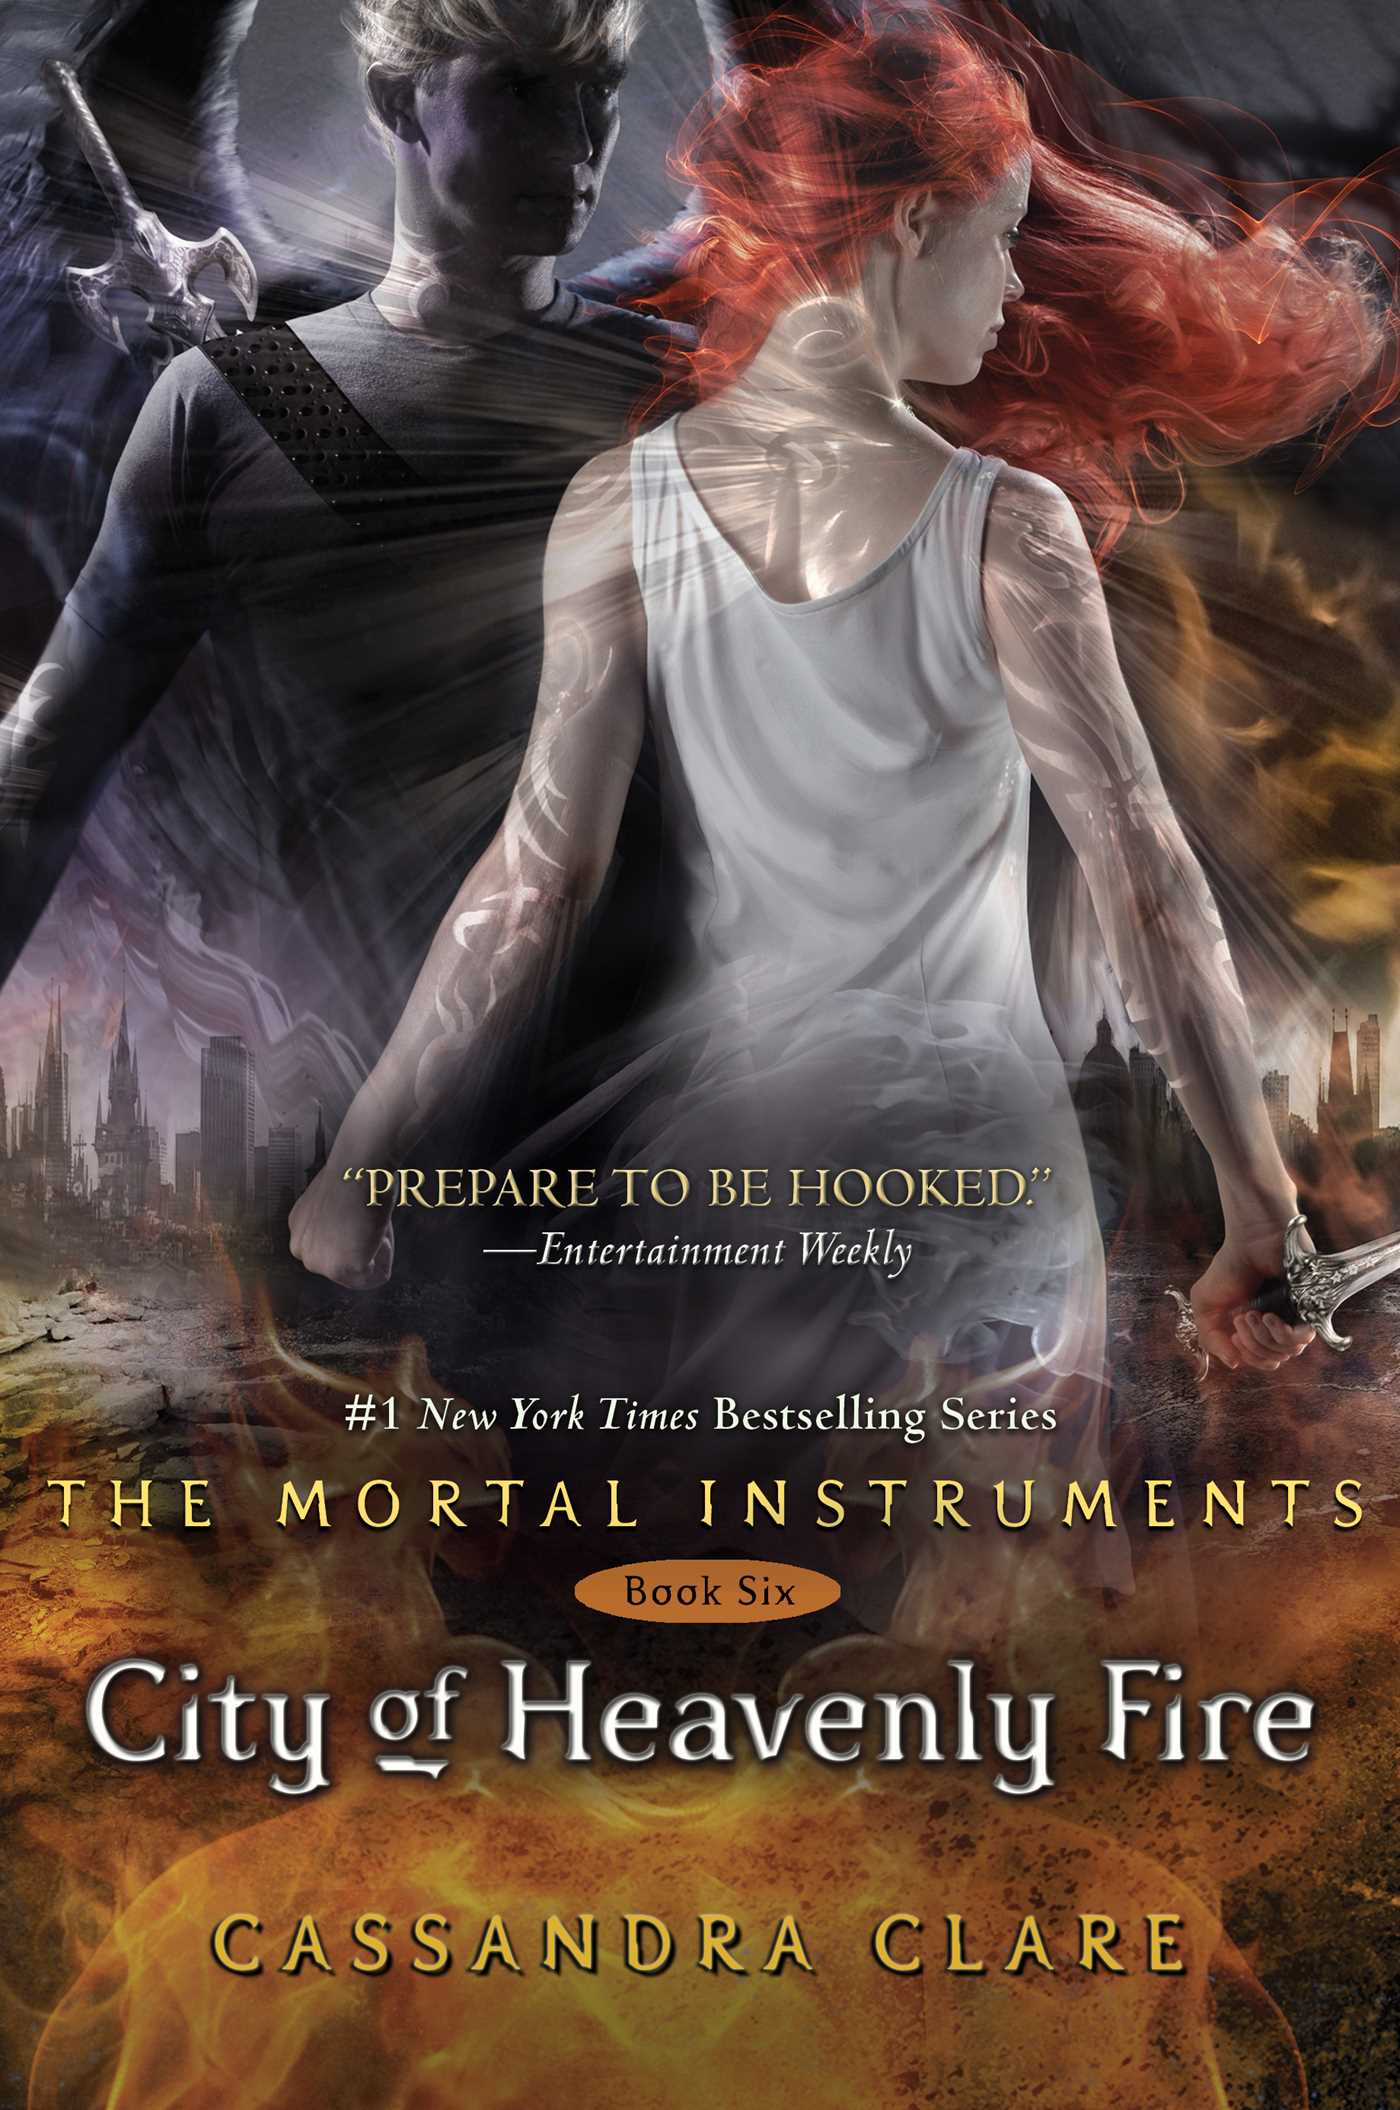 The Mortal Instruments: City of Heavenly Fire (Series #6) (Hardcover) - image 1 of 1